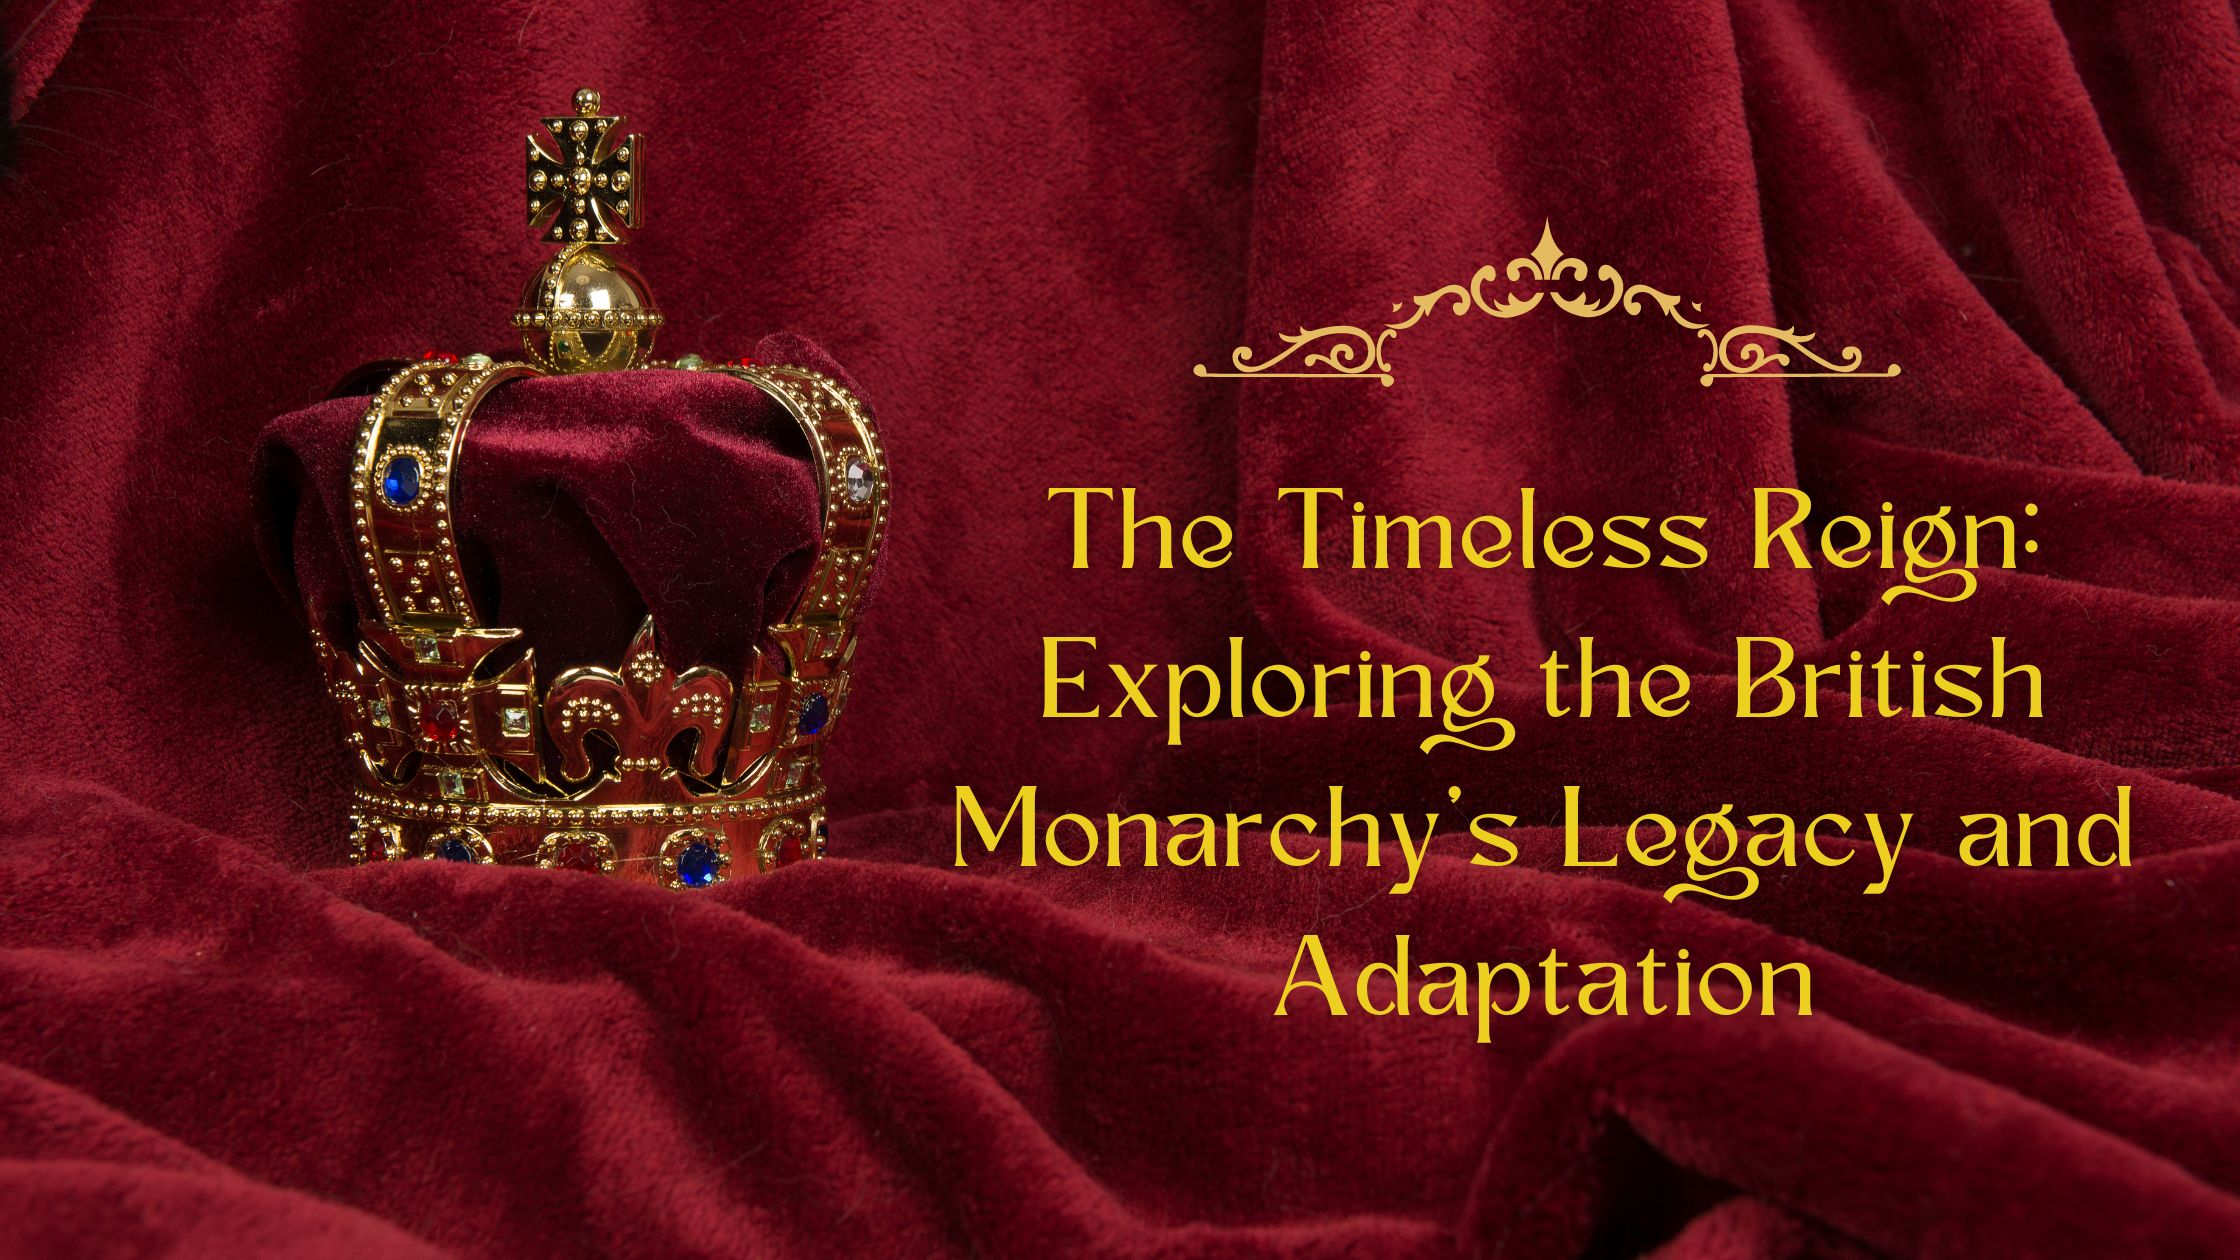 The Timeless Reign: Exploring the British Monarchy’s Legacy and Adaptation